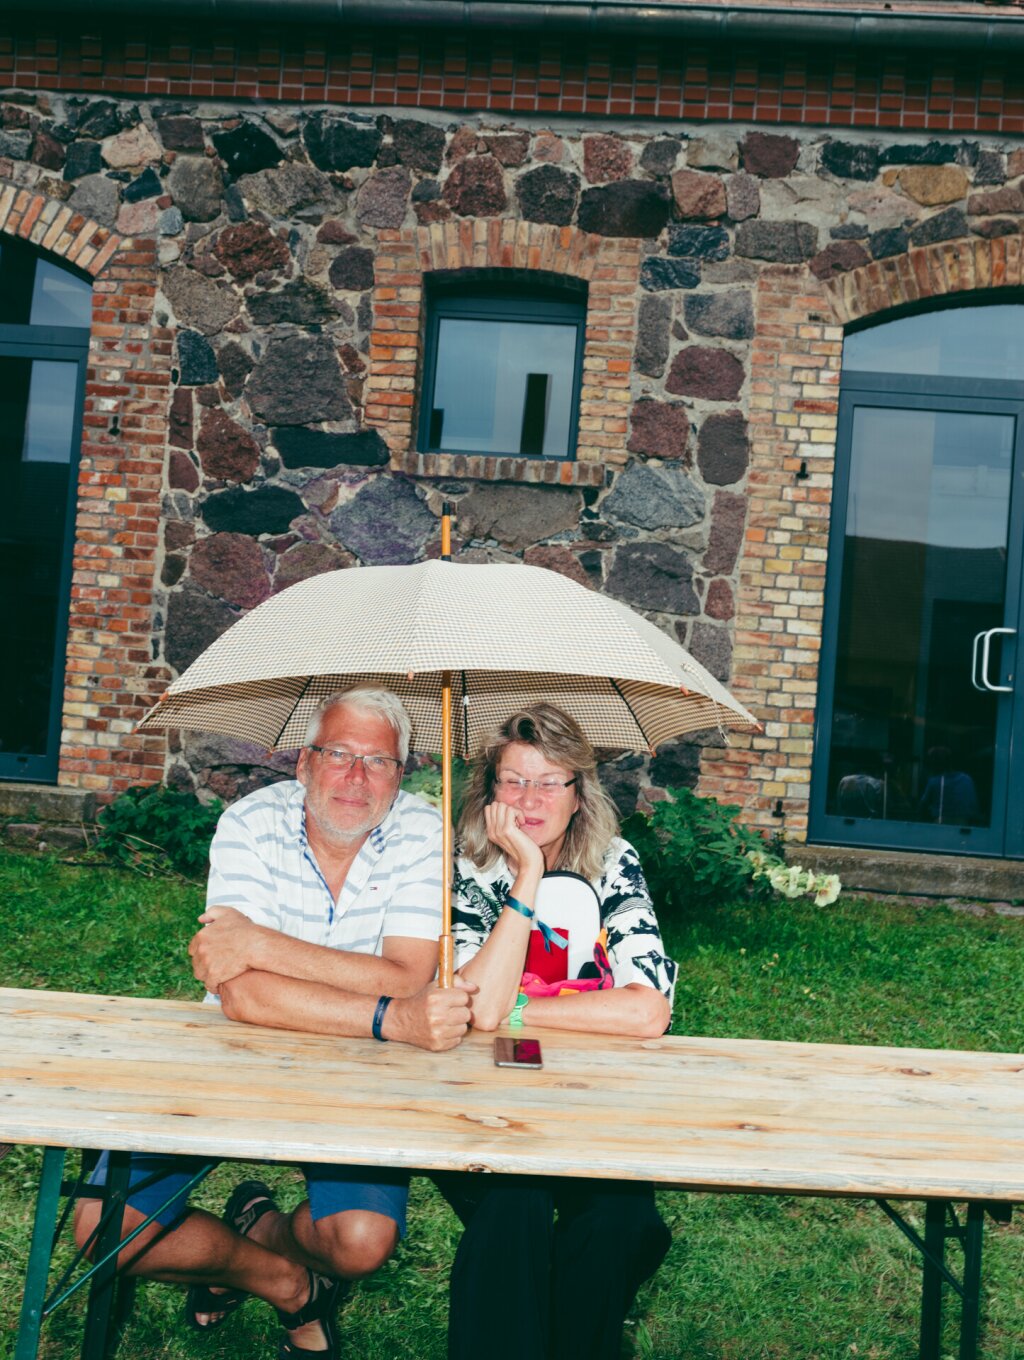 A couple is sitting under an umbrella at a beer table, the woman is smiling.